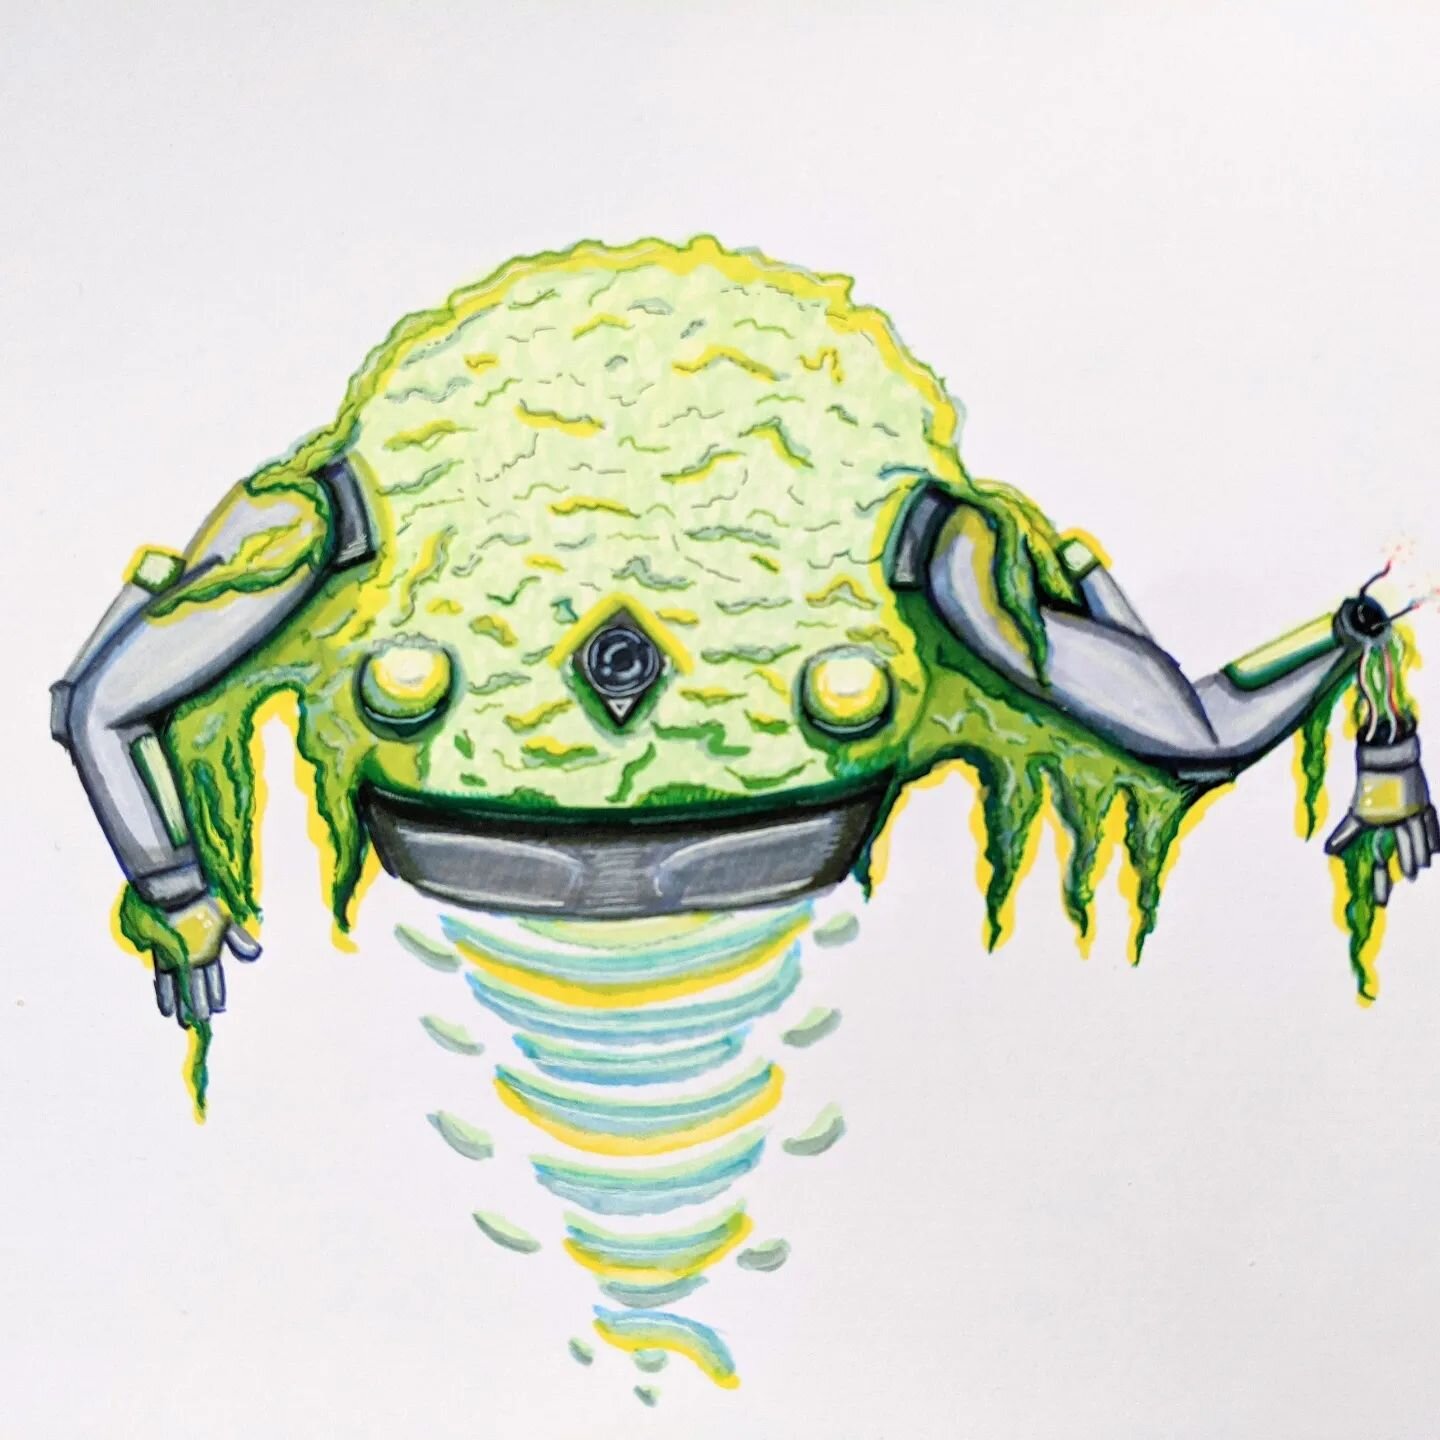 Little mushroom orb buddy! Spore Drone by @willapaints for the #EraofSilence

These semi-intelligent fungus units perform basic tasks for sentient life. 
.
.
.
.
.
#fungus #mushroom #scifi #fantasy #sciencefantasy #gameart #game #ttrpg #tabletopgames